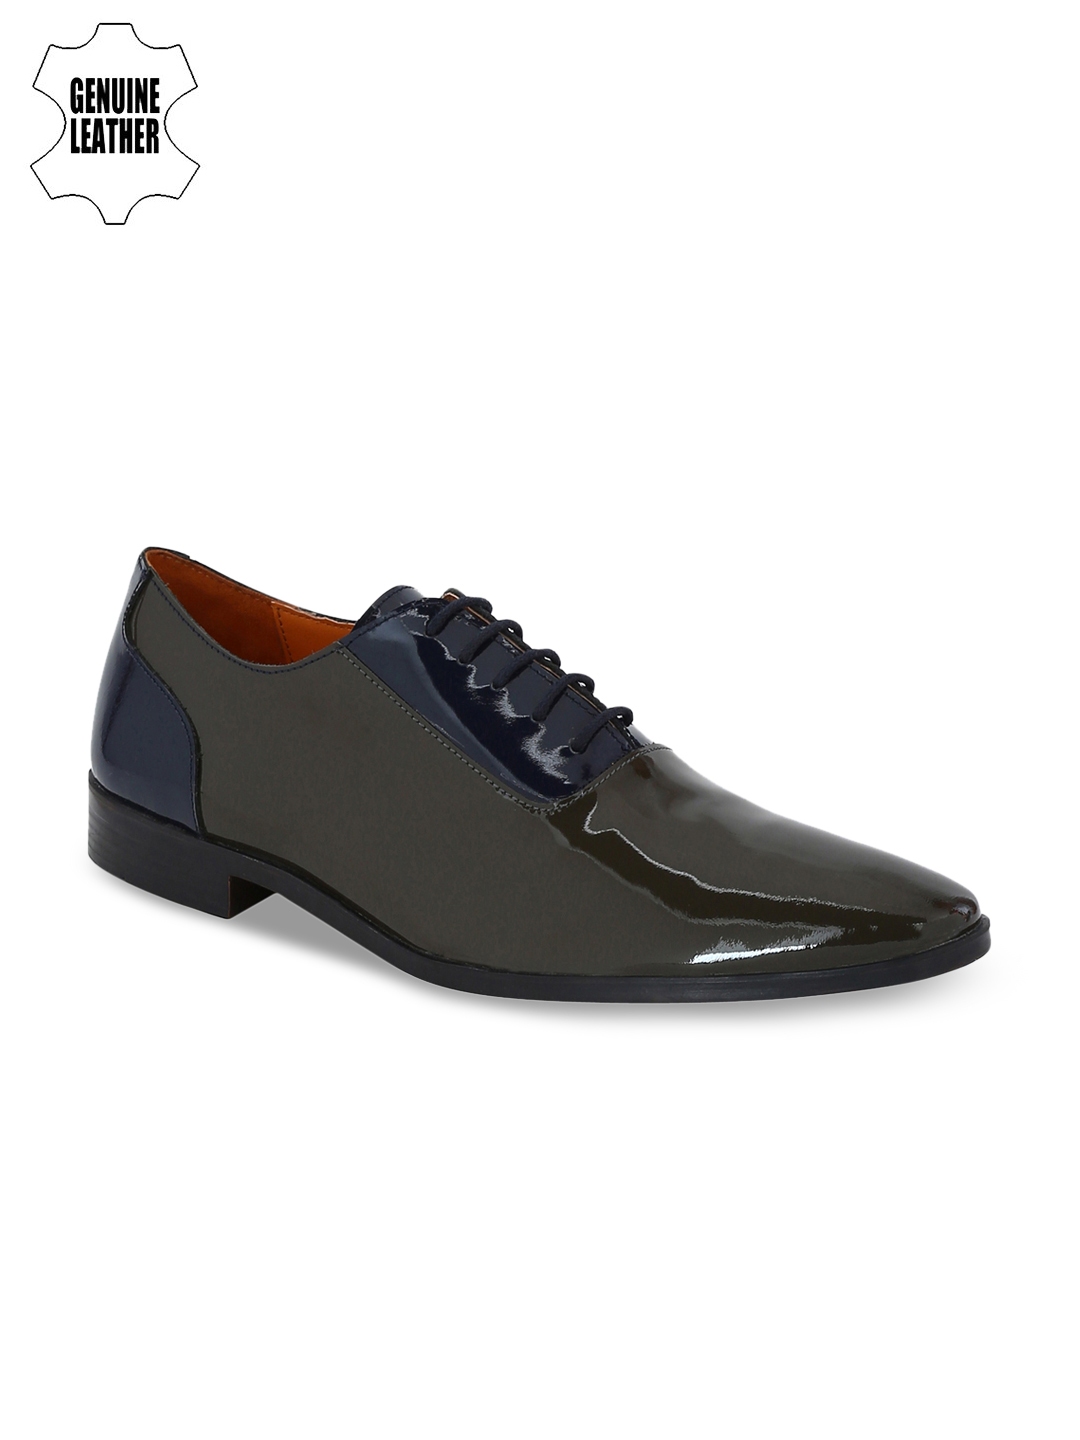 patent leather oxford shoes mens